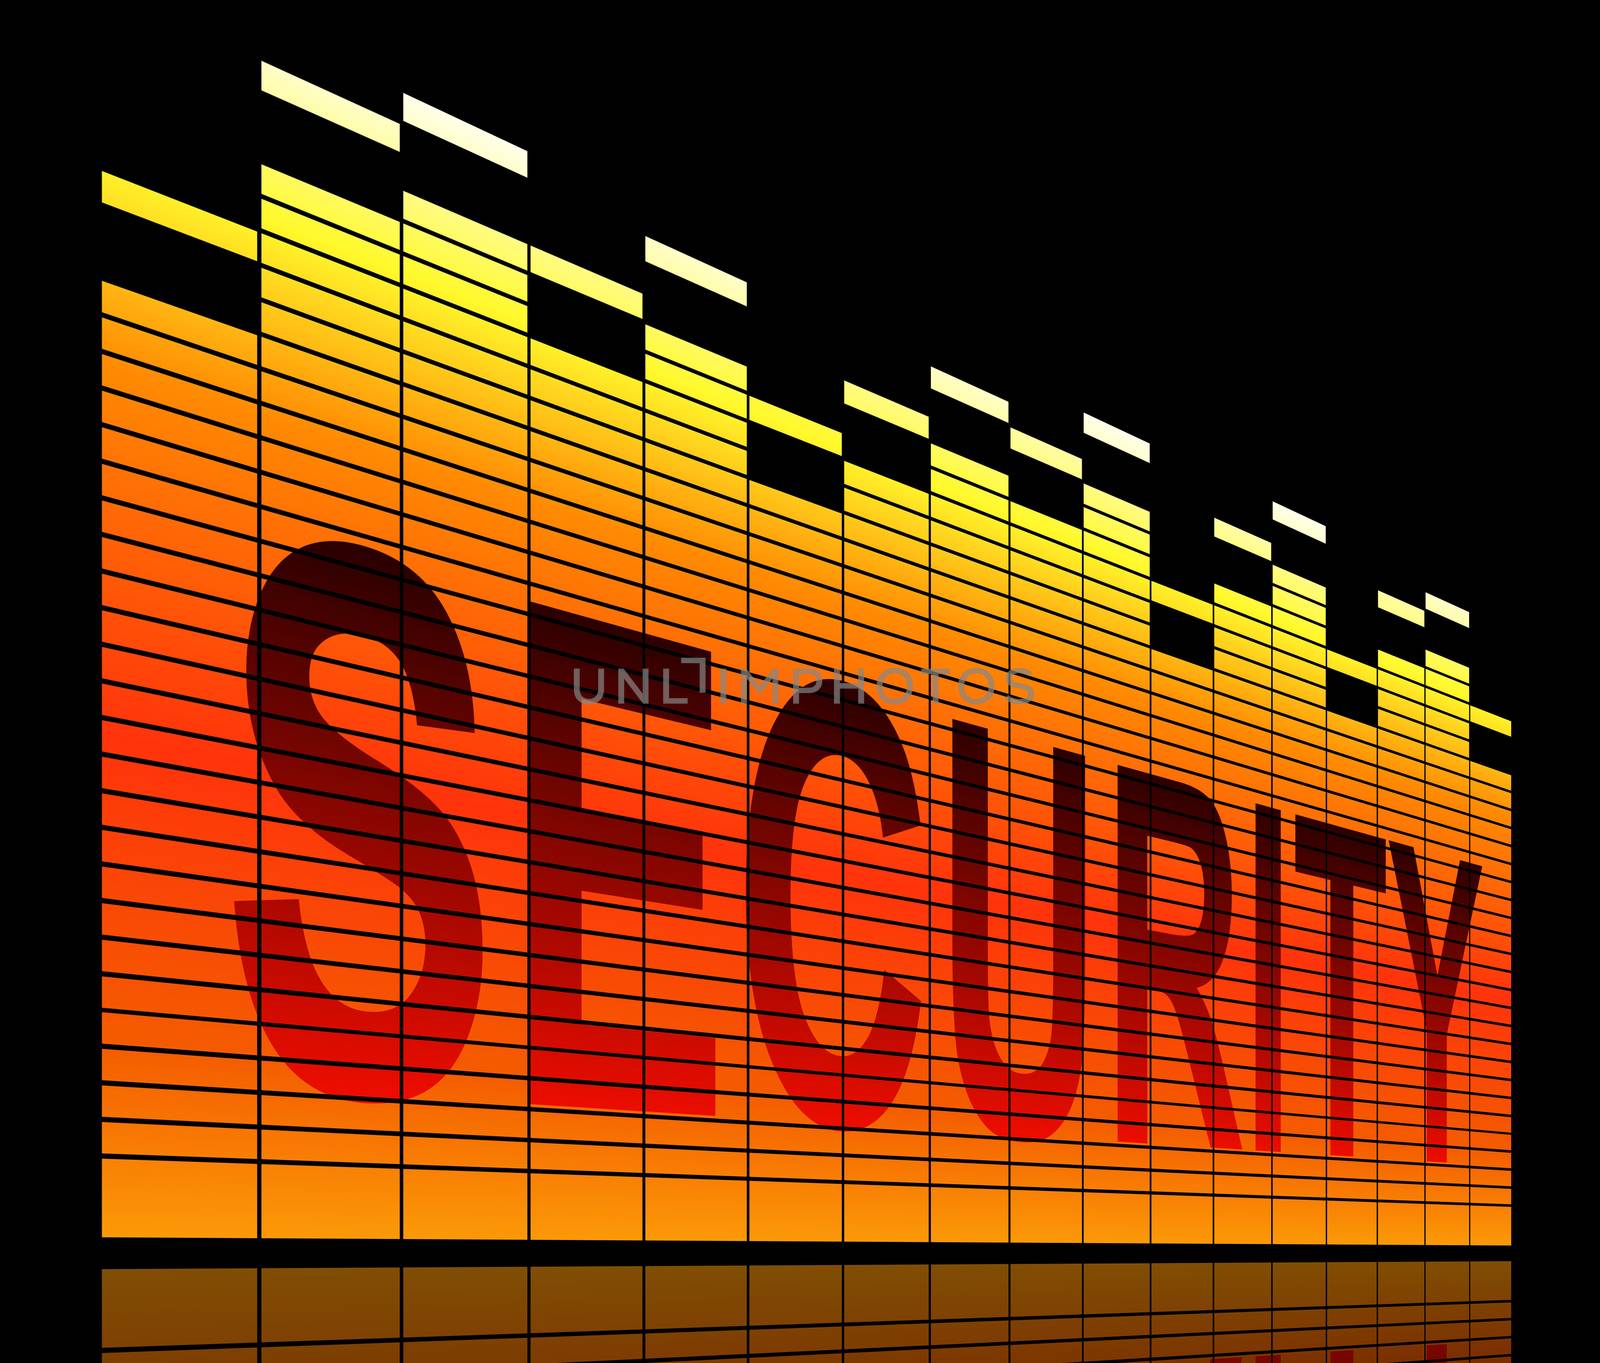 Illustration depicting graphic equalizer levels with a security concept.